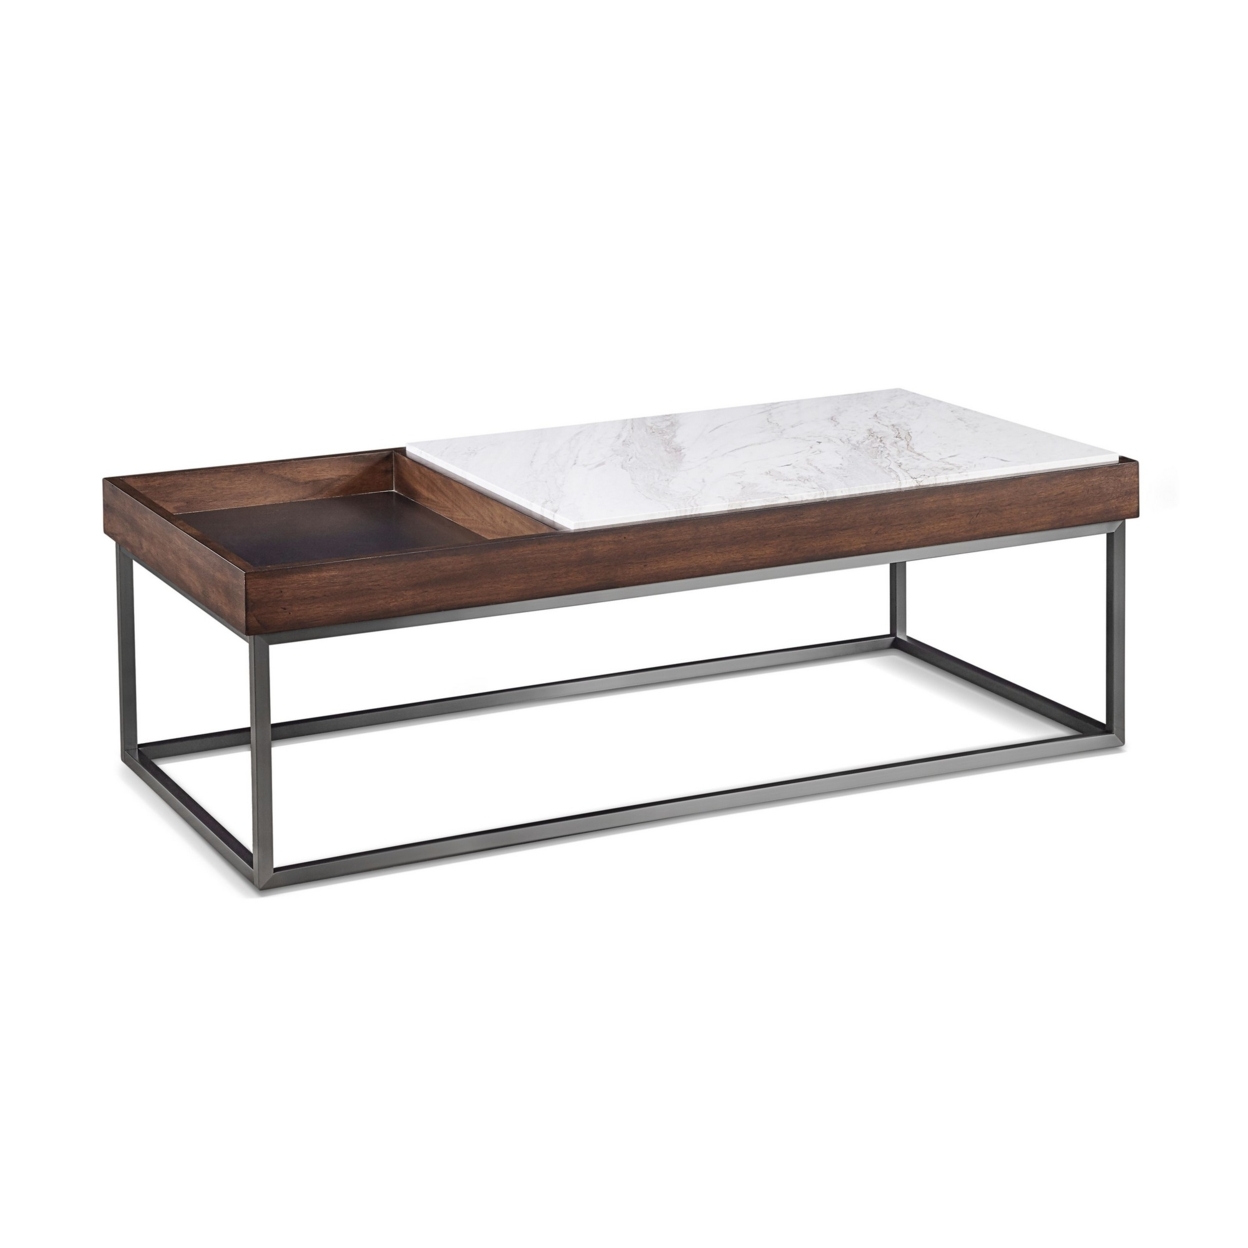 48 Inches Marble Top Coffee Table With Storage Slot, White And Brown- Saltoro Sherpi